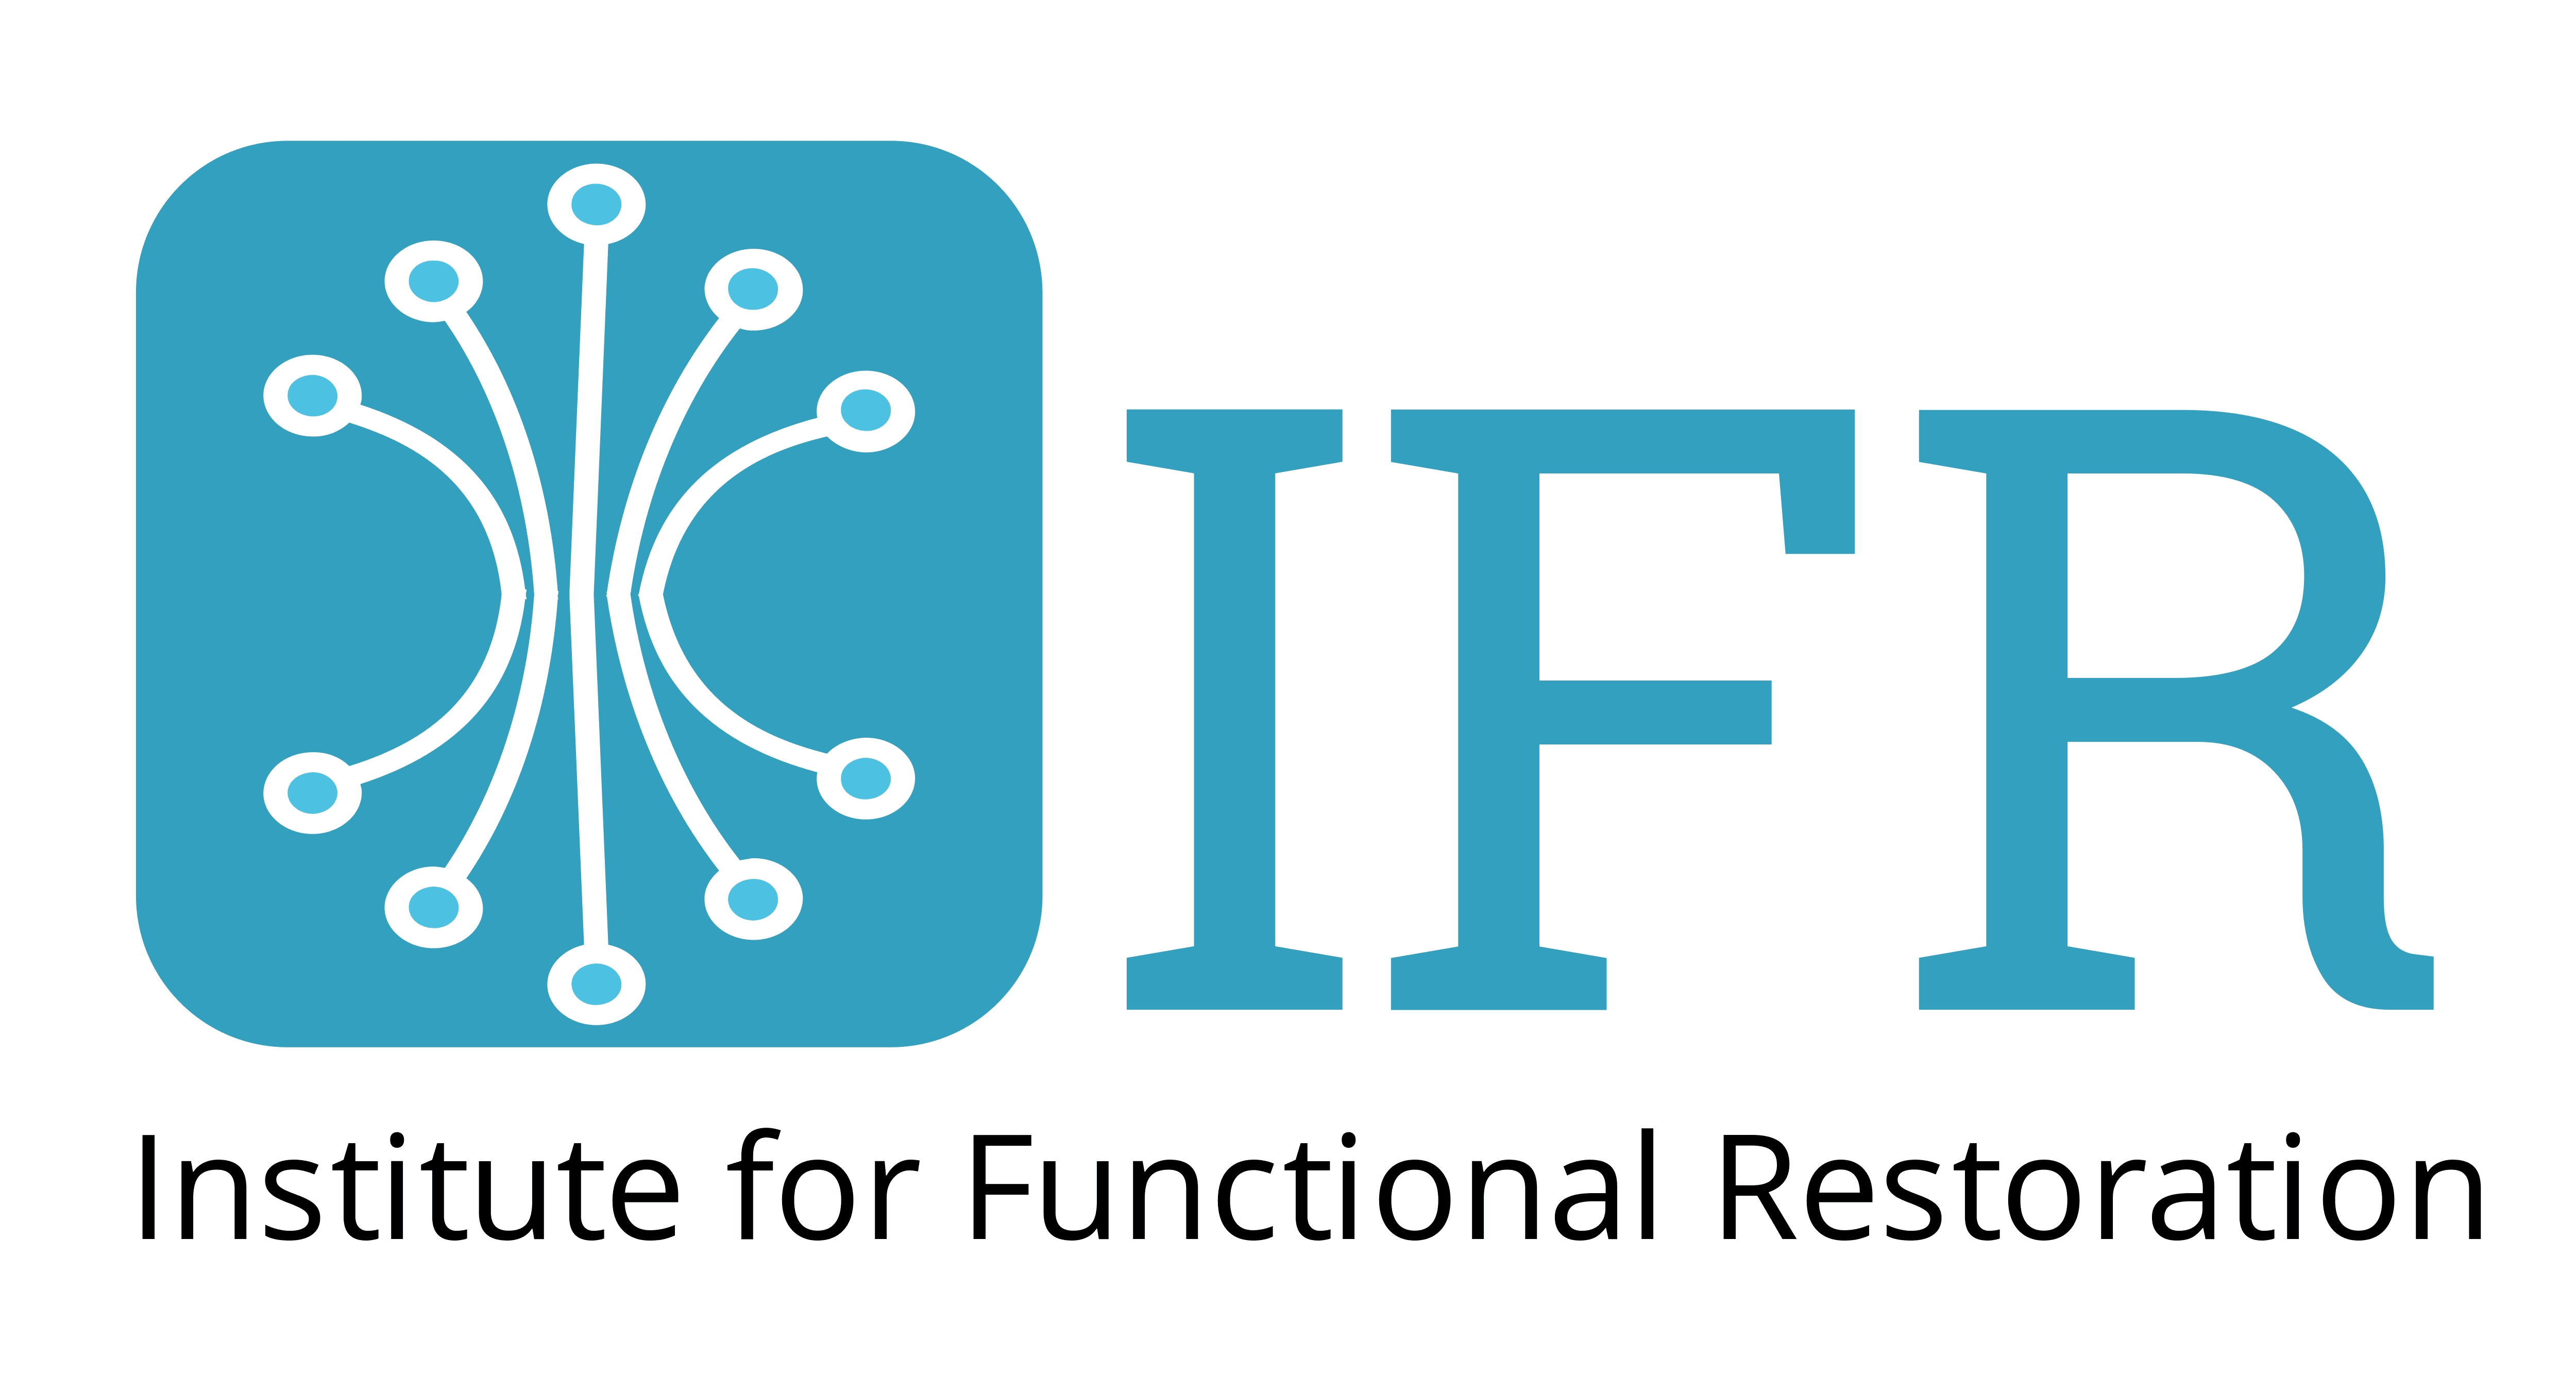 Institute for Functional Restoration (IFR)